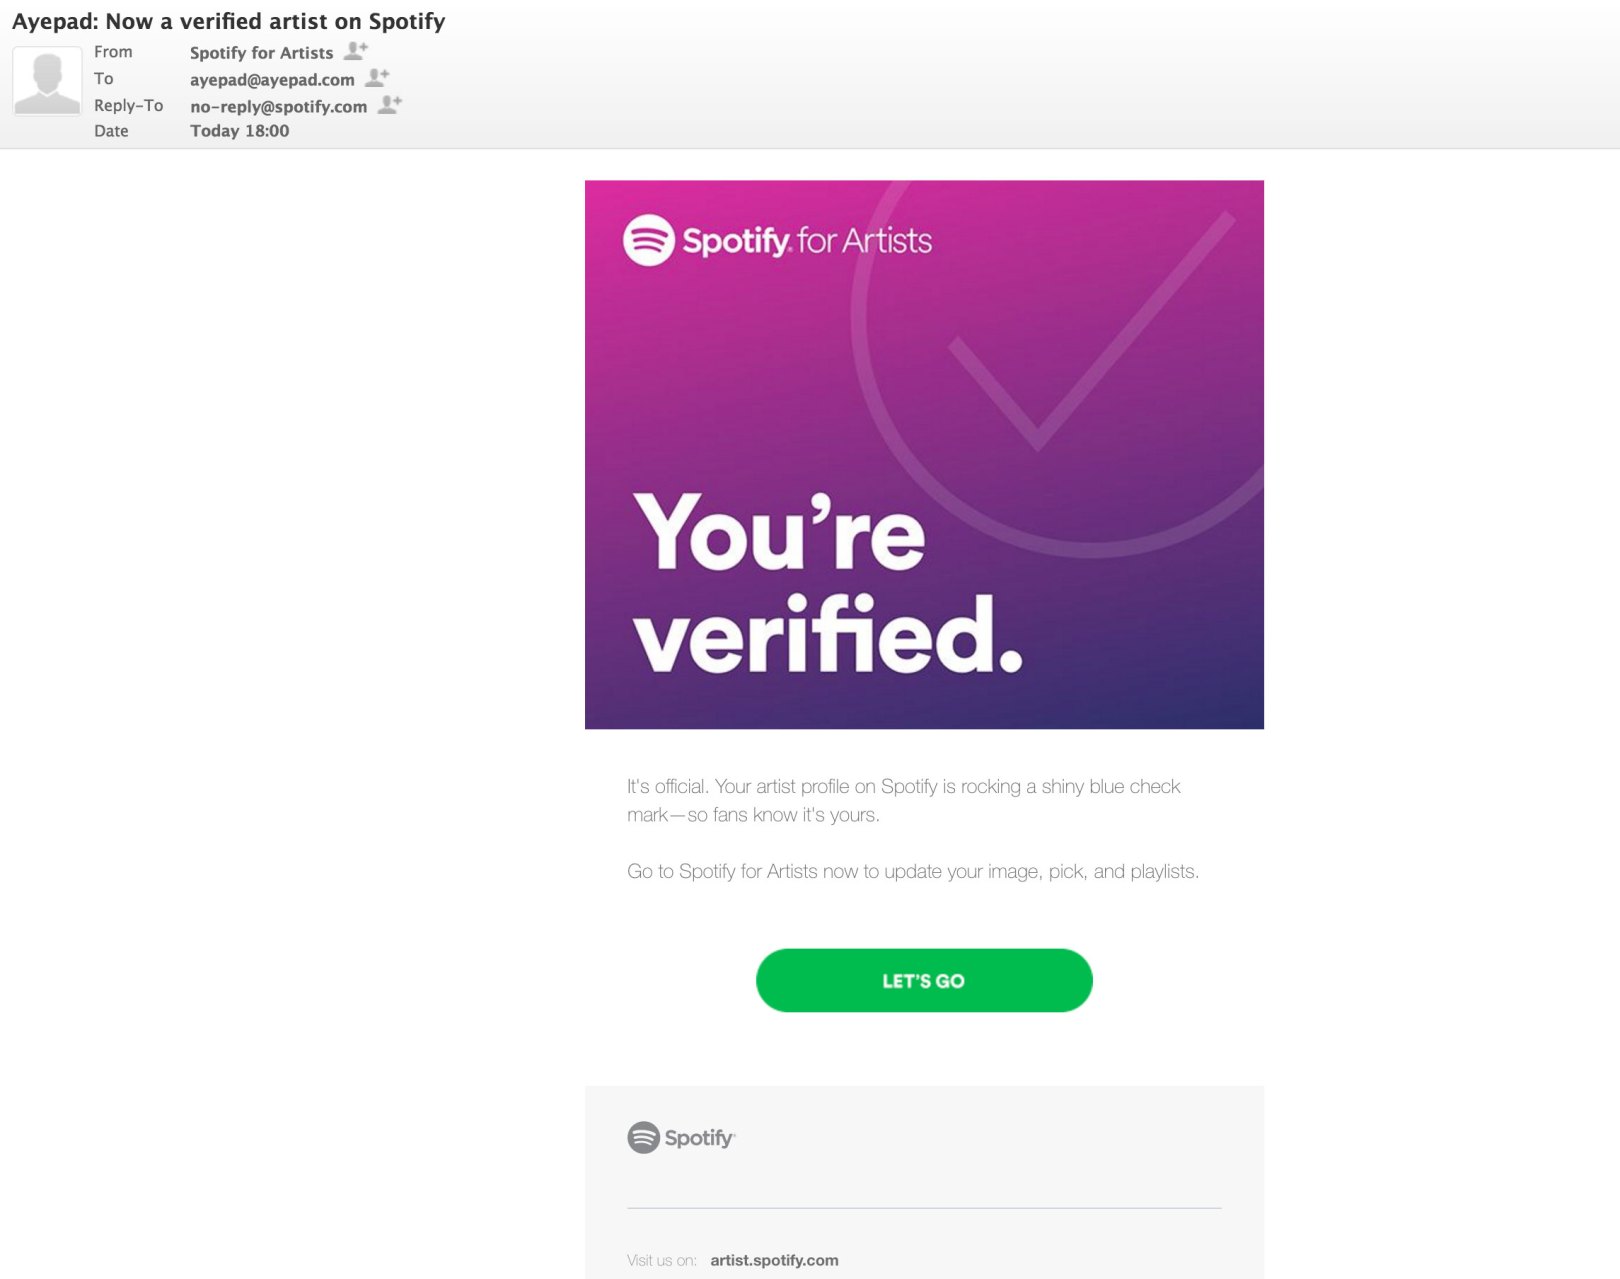 Email from Spotify